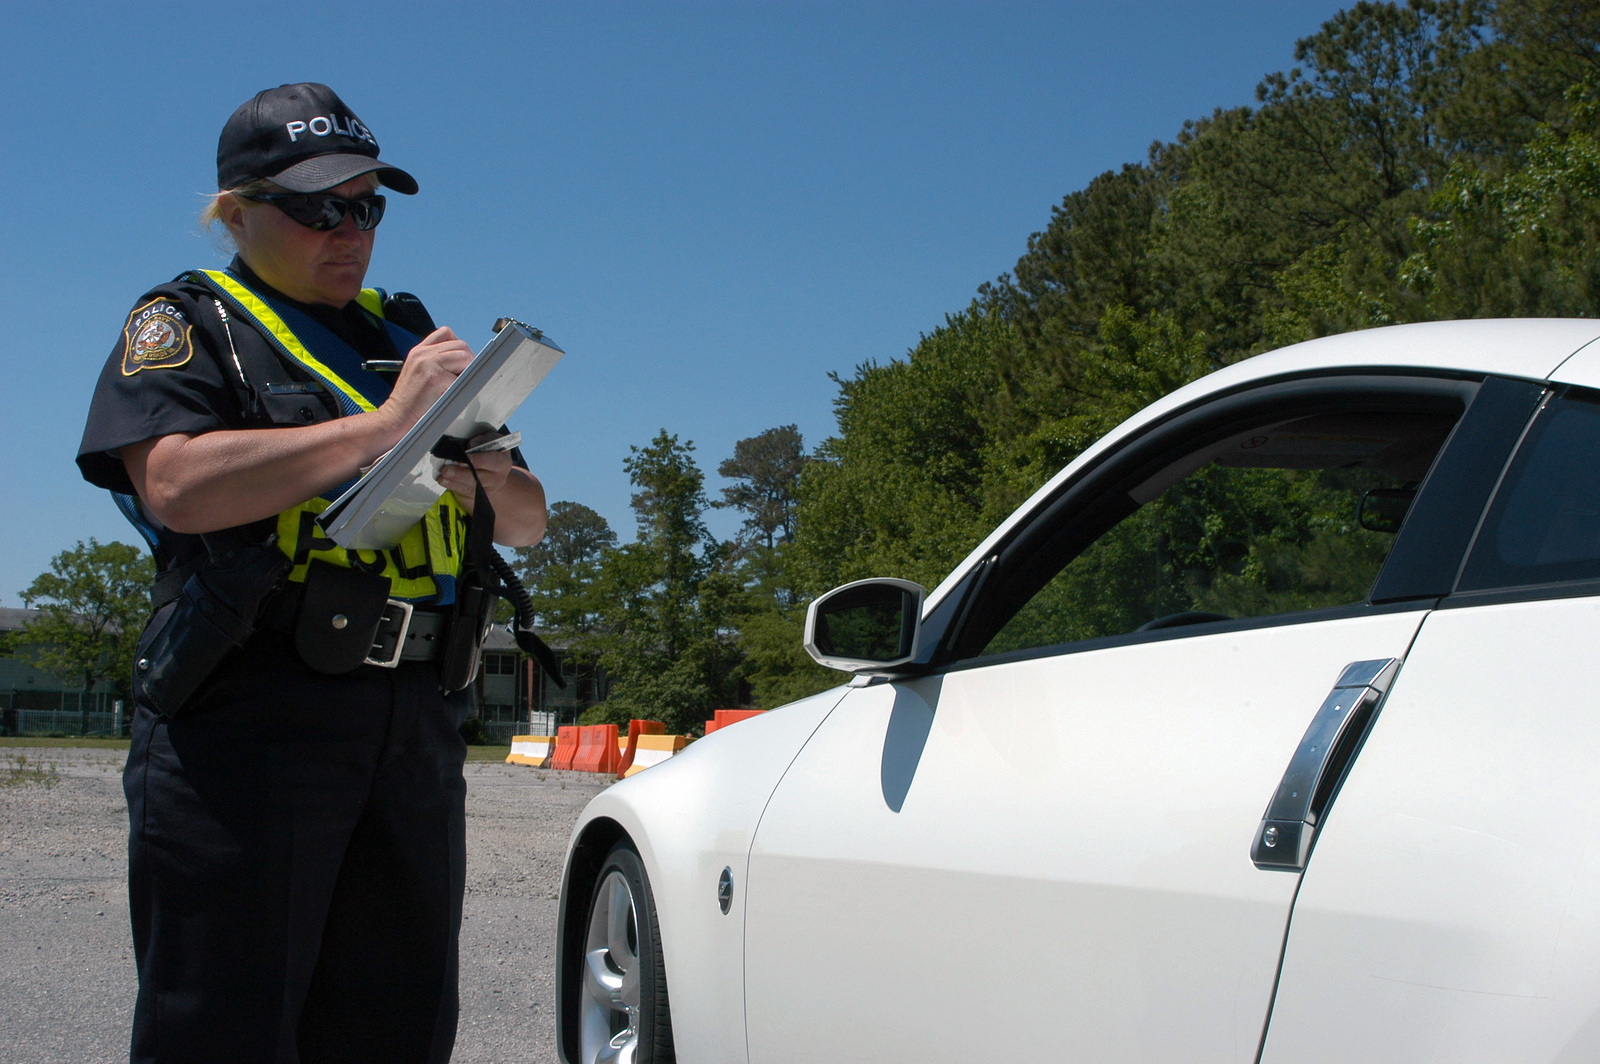 The importance of conducting police checks when hiring new persons.